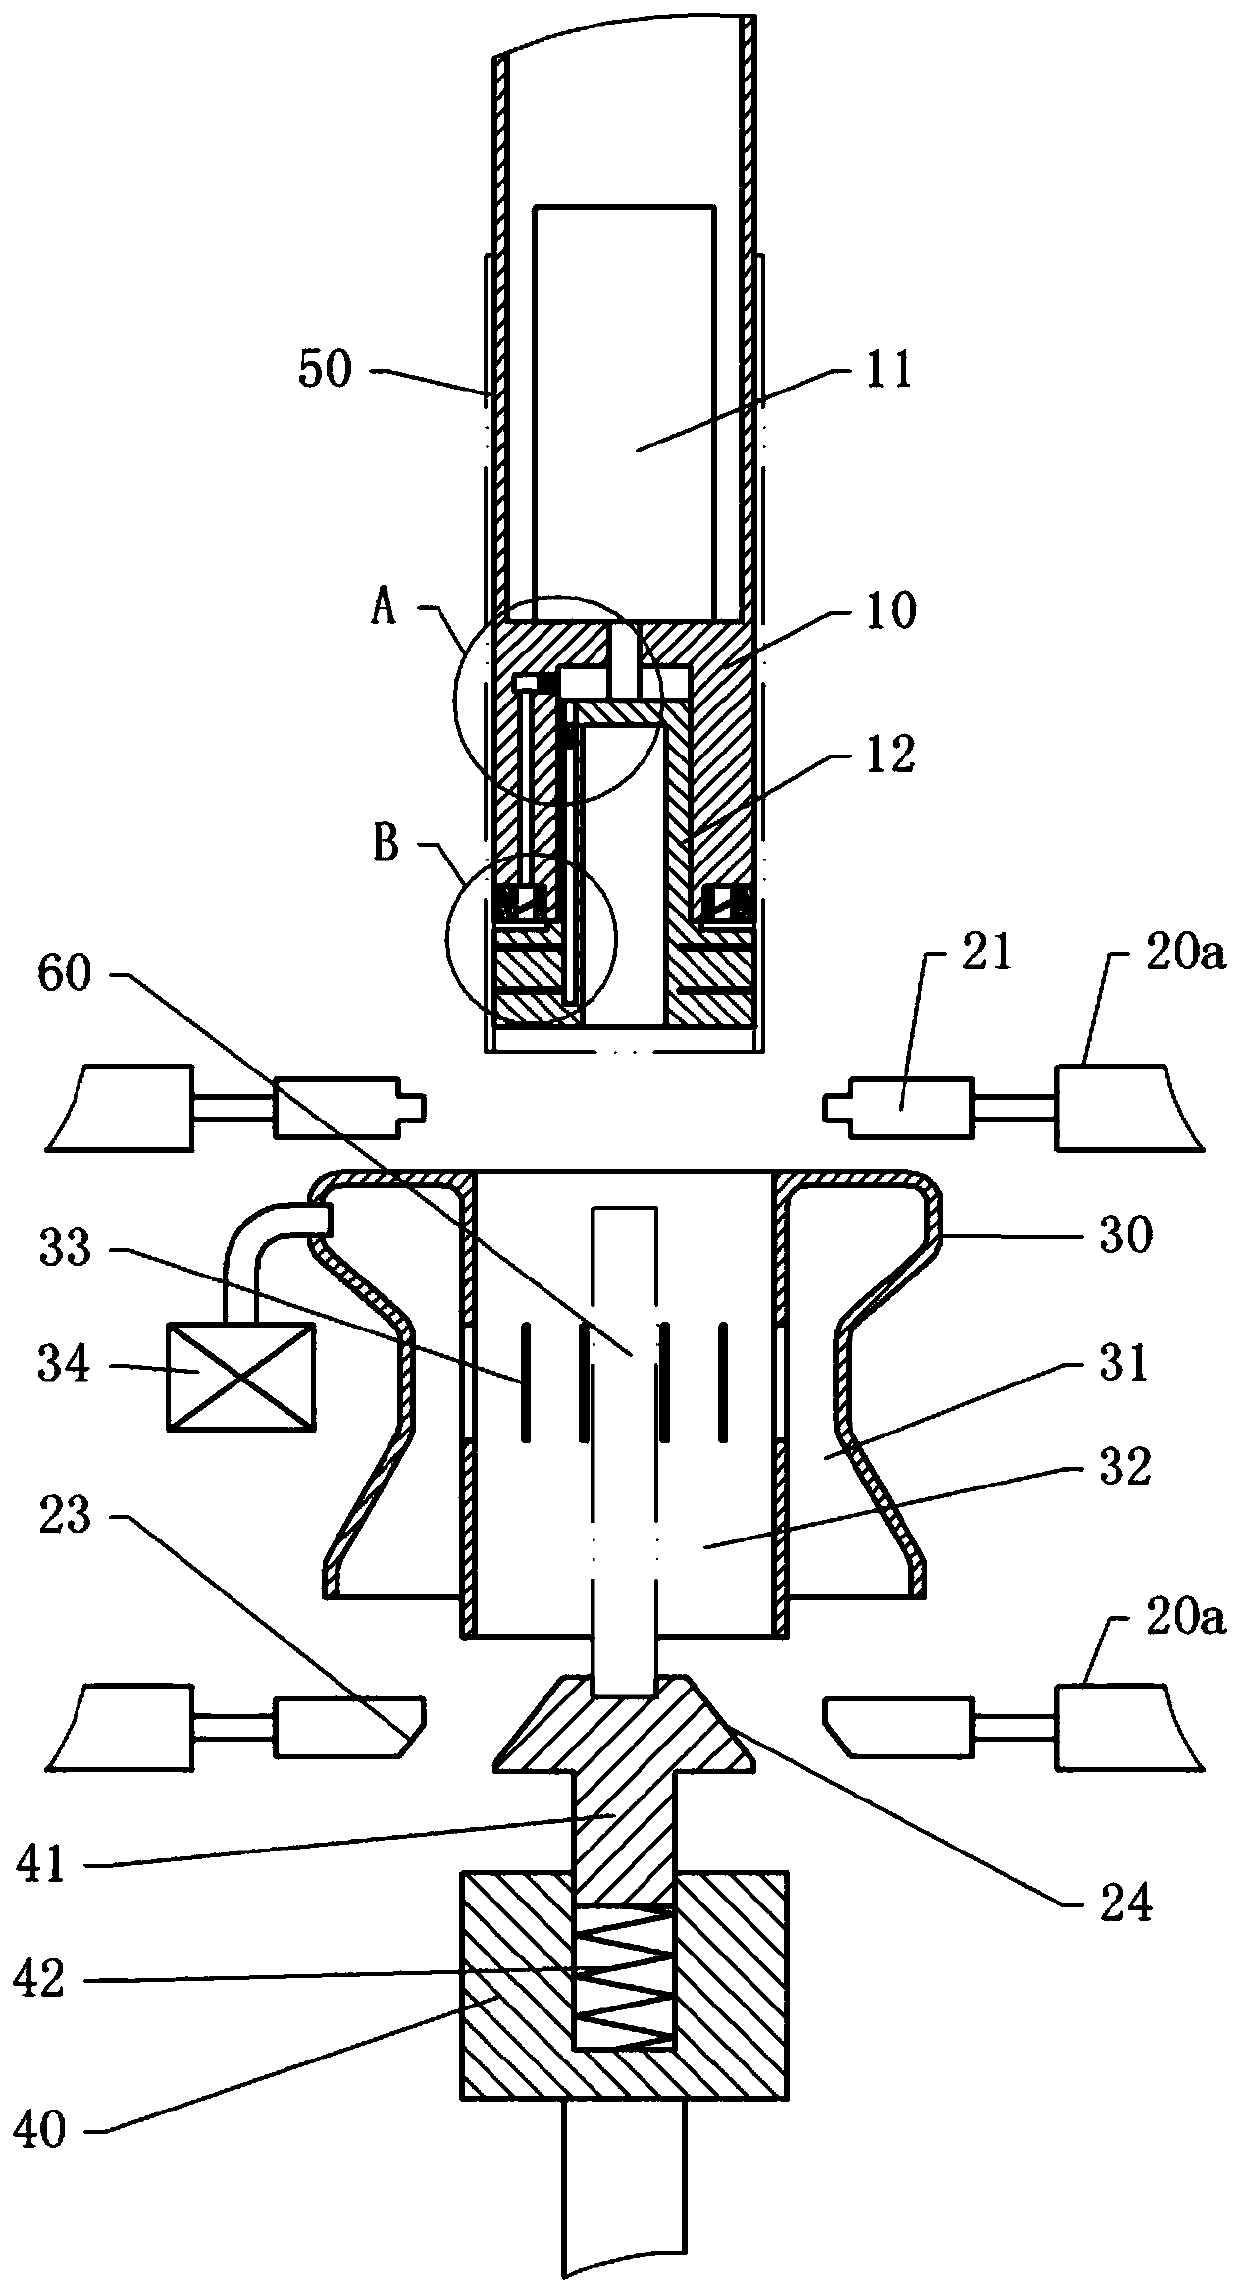 An electronic device packaging device